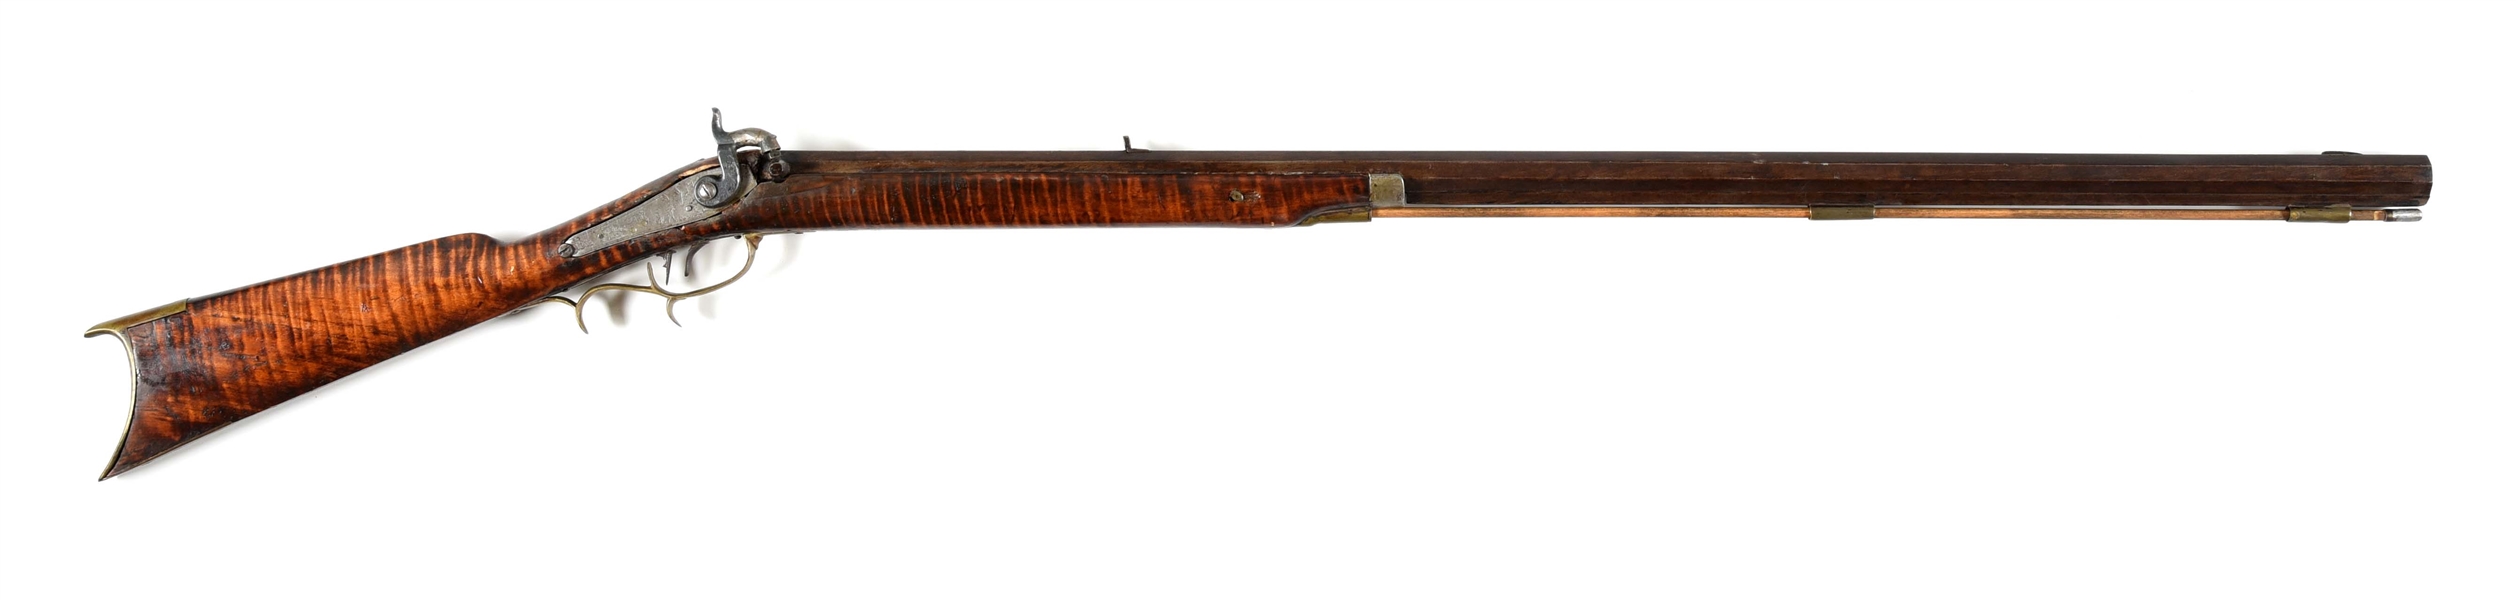 (A) HALF STOCK PERCUSSION RIFLE WITH GOLCHER LOCK.